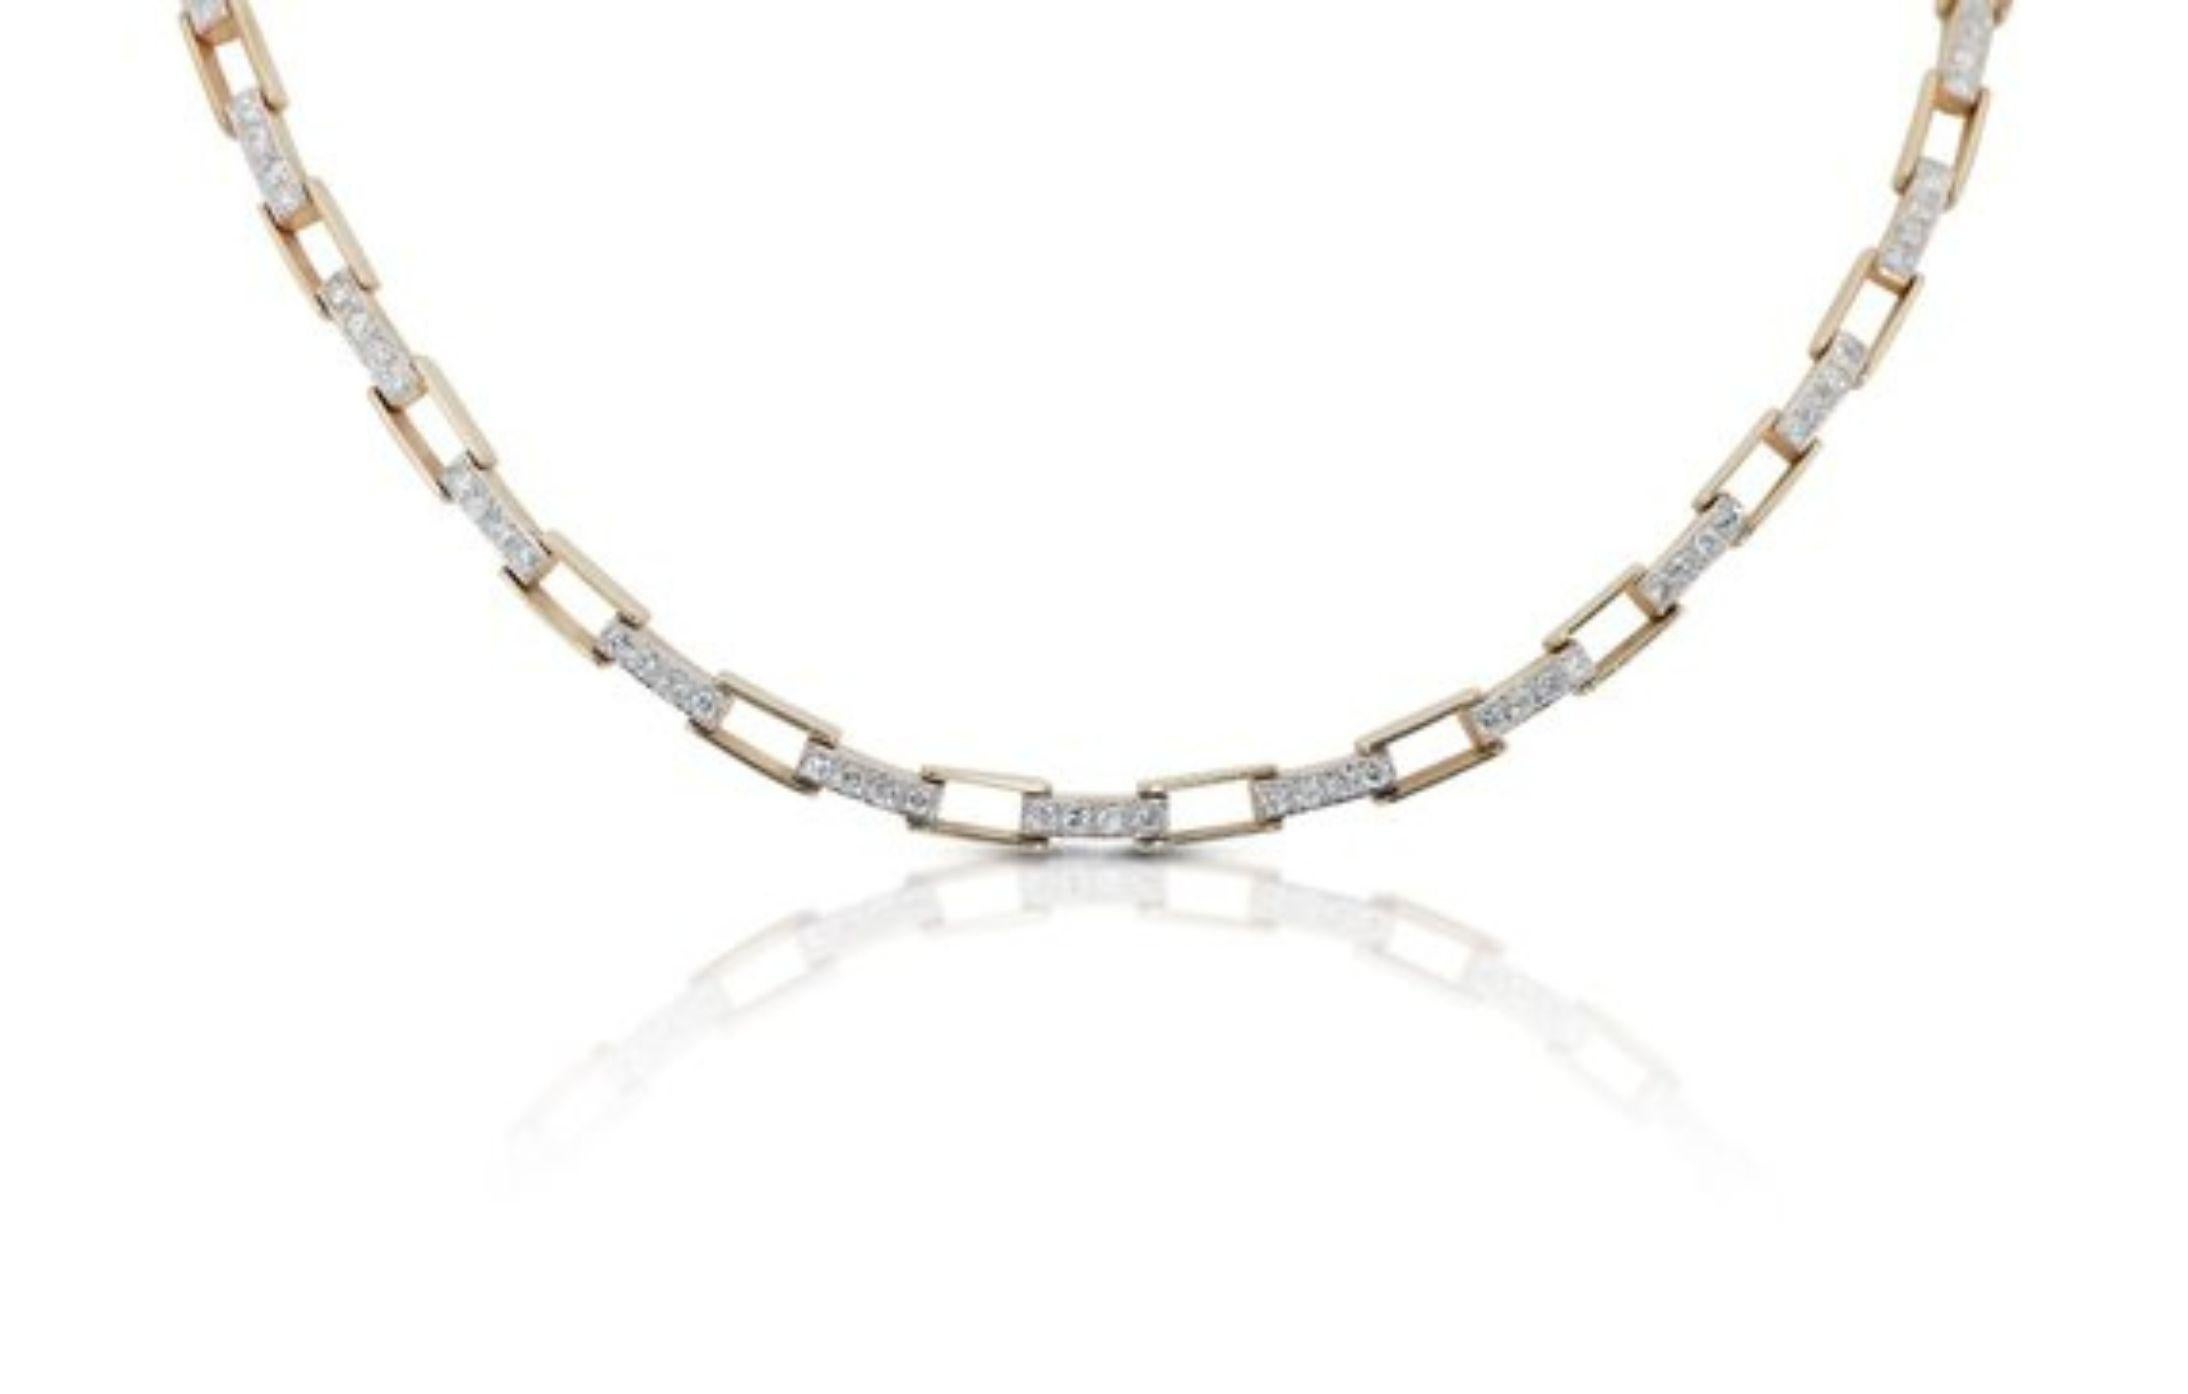 This necklace captures the essence of pure brilliance, a breathtaking adornment that demands attention with its captivating 3.12 carat round diamond. Glimmering with G-H color and I1-I2 clarity, the diamond's facets dance with light, creating a